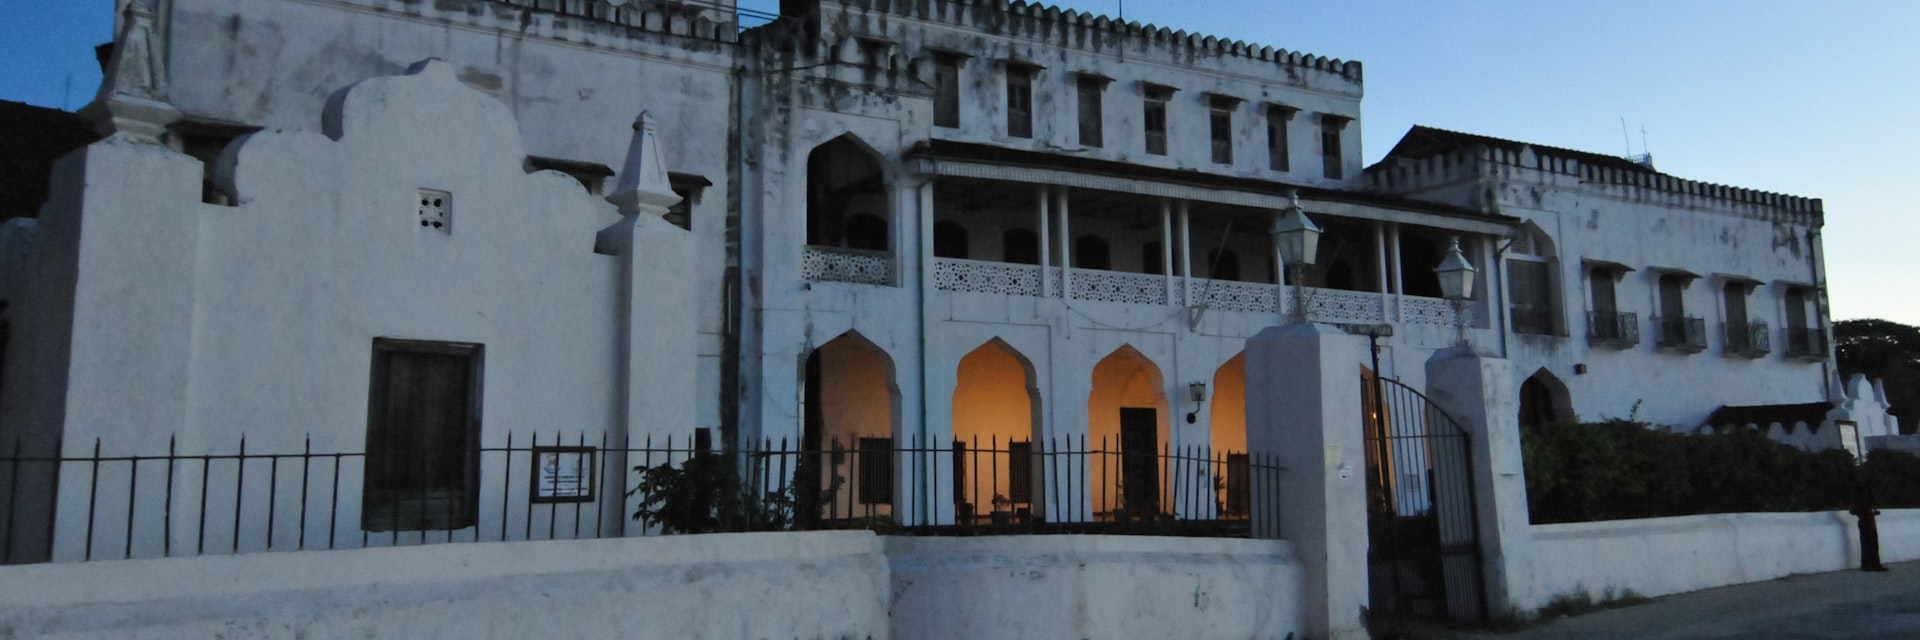 The Sultan's Palace (Palace Museum) is one of the main historical buildings of Stone Town, Zanzibar as seen at sunset.